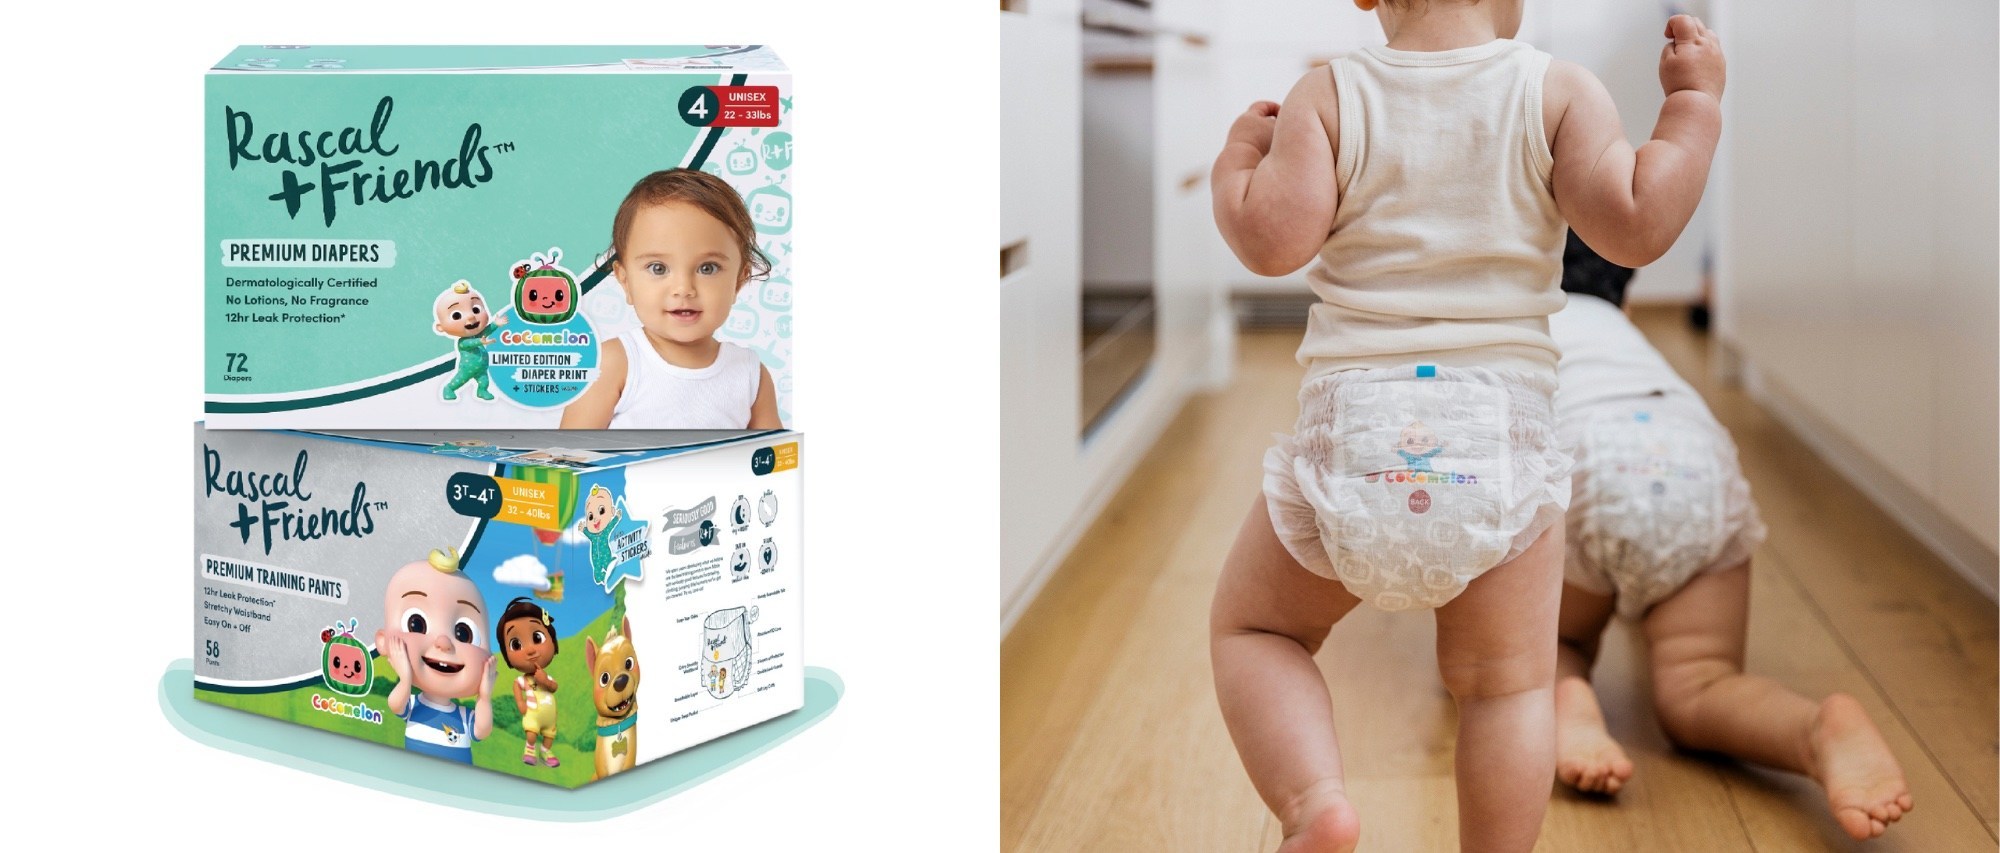 PREMIUM BABY BRAND RASCAL + FRIENDS PARTNERS WITH MOONBUG